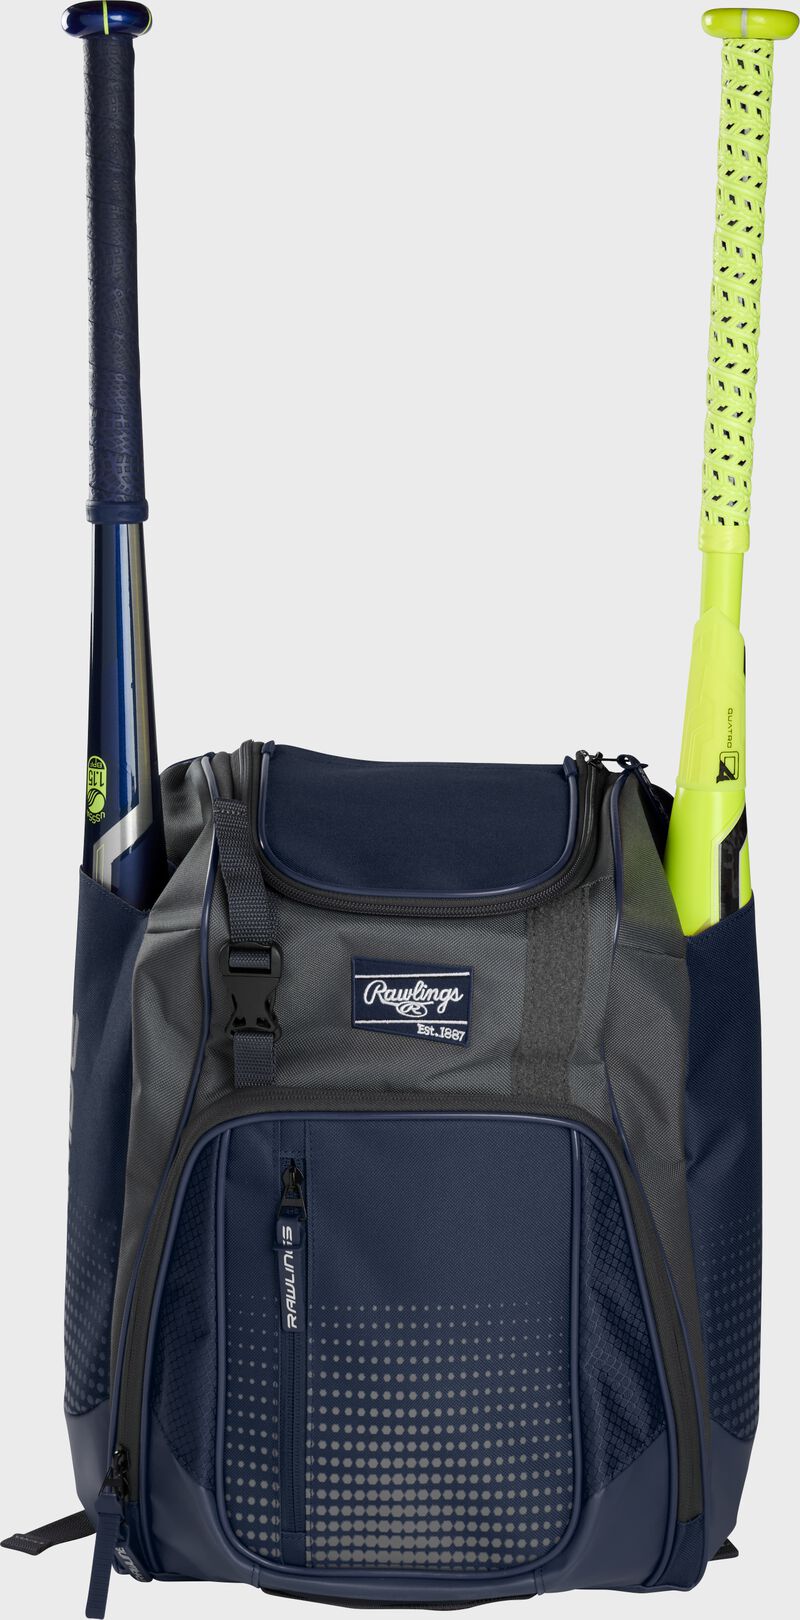 Front of a navy Rawlings Franchise baseball backpack with two bats in the side sleeves - SKU: FRANBP-N loading=